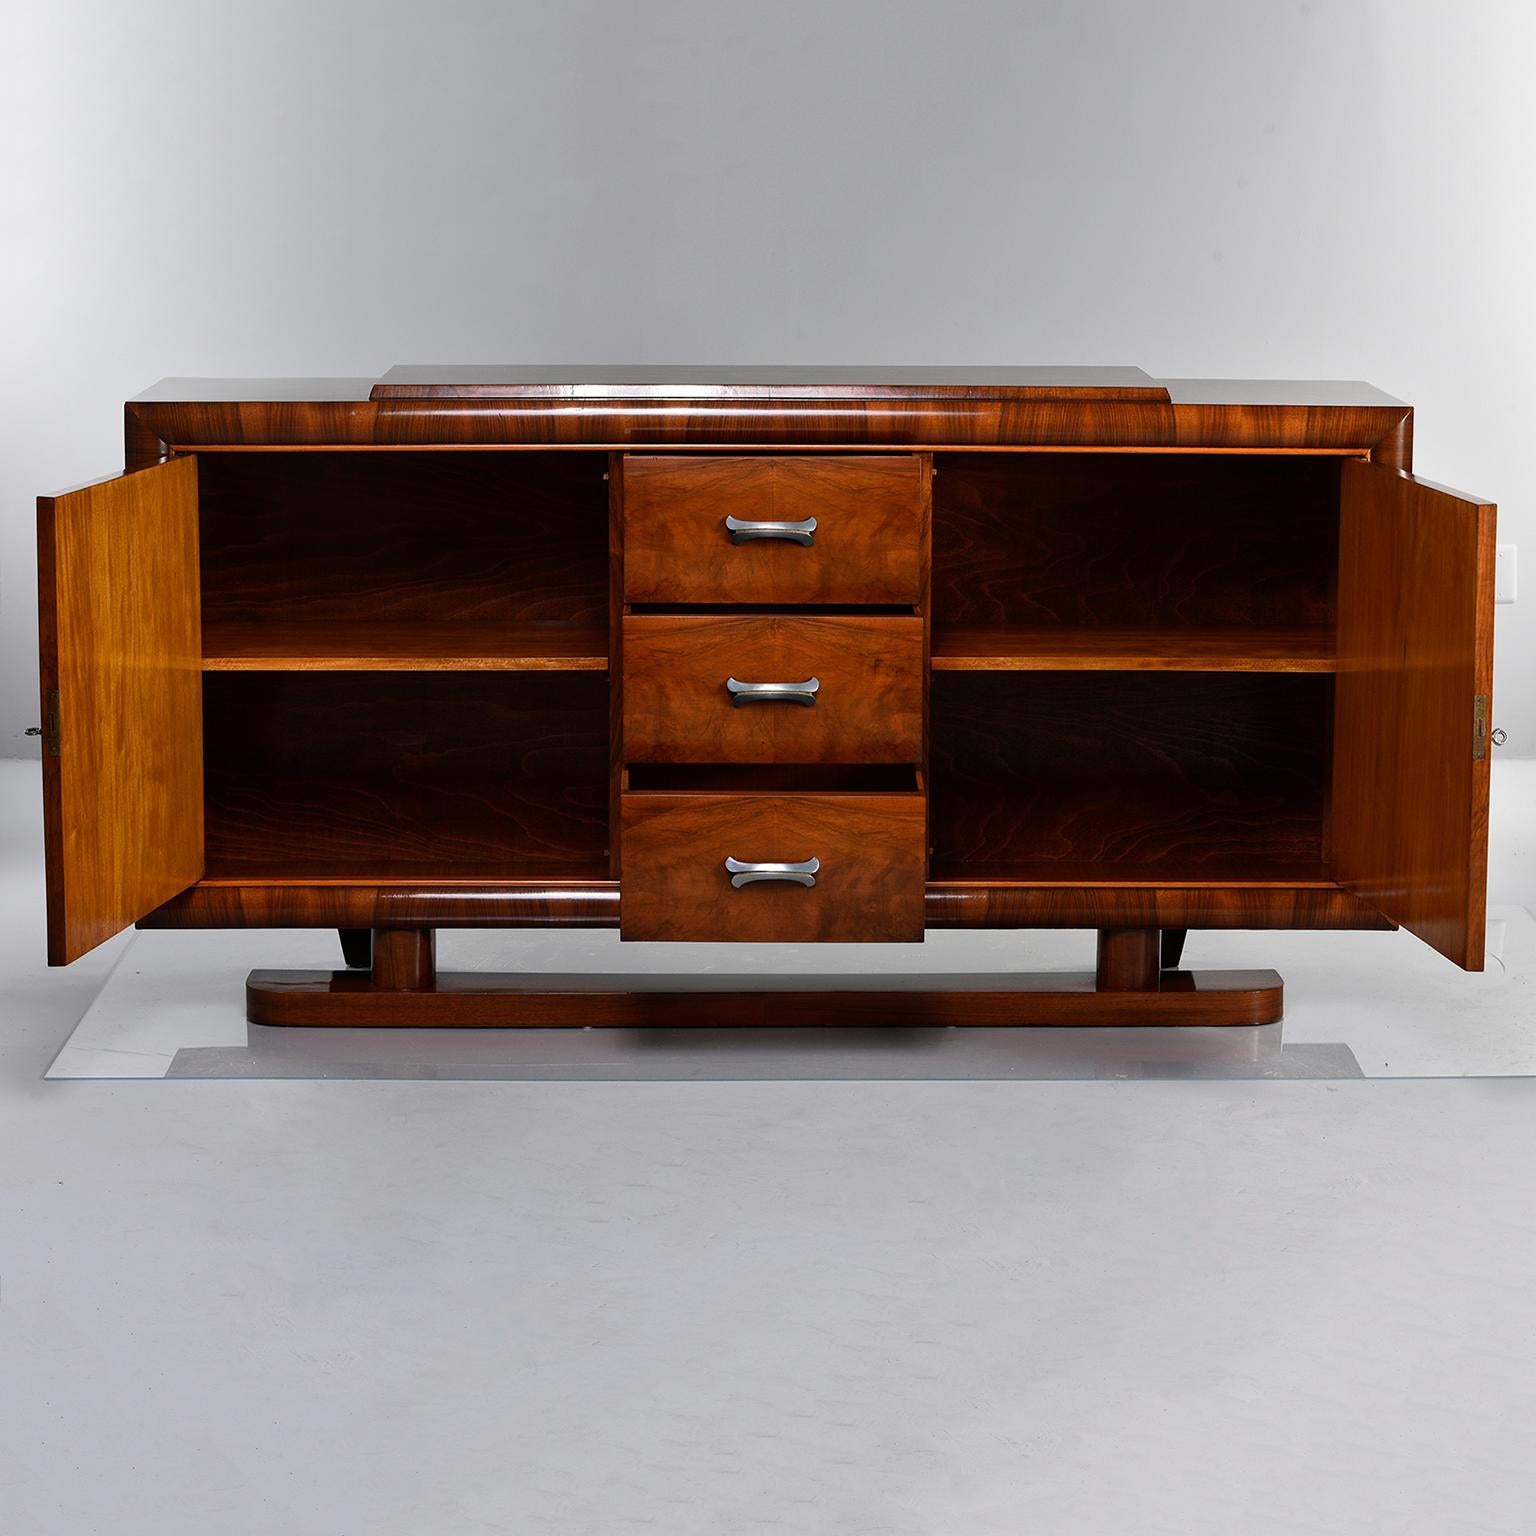 French deco era sideboard in walnut with three centre drawers flanked by locking cabinets with single internal shelf, circa 1930s. Details include a pedestal base at front, nickel hardware and bookmarked veneer panels on cabinet doors and cabinet